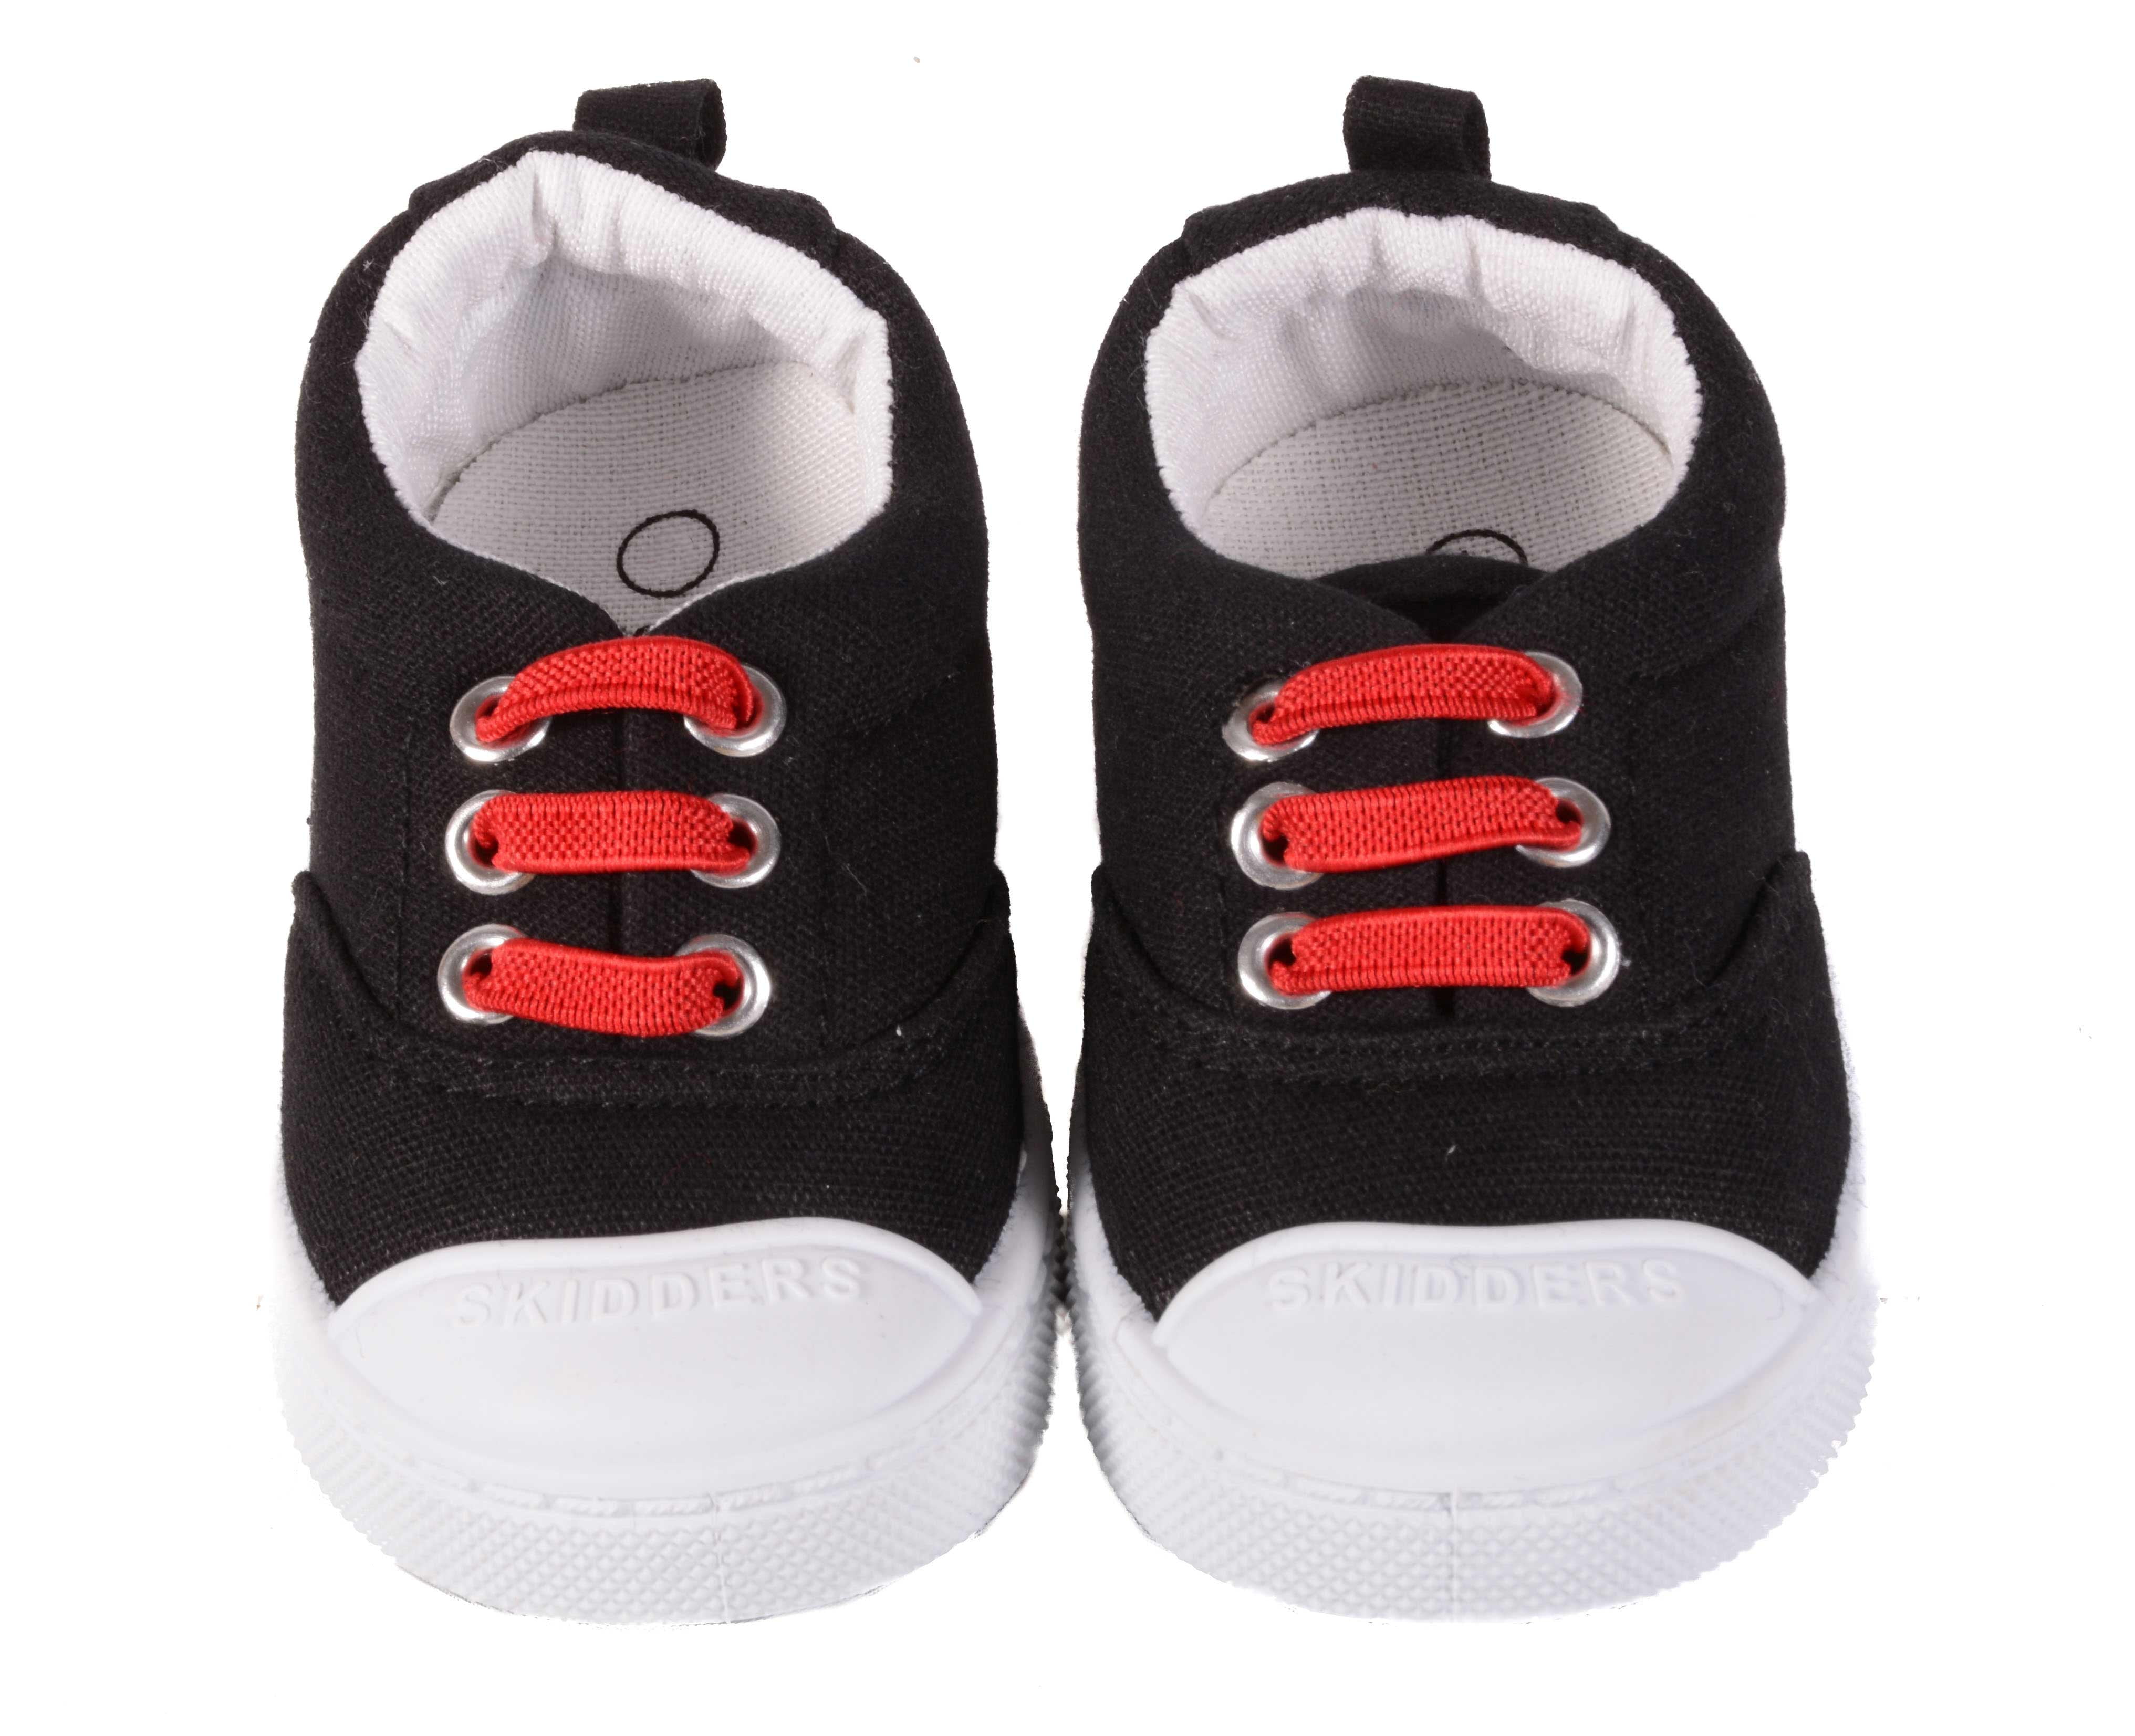 Skidders Canvas Baby Toddler Boys Shoes Style SK1009 Size 2 - up to 18 ...